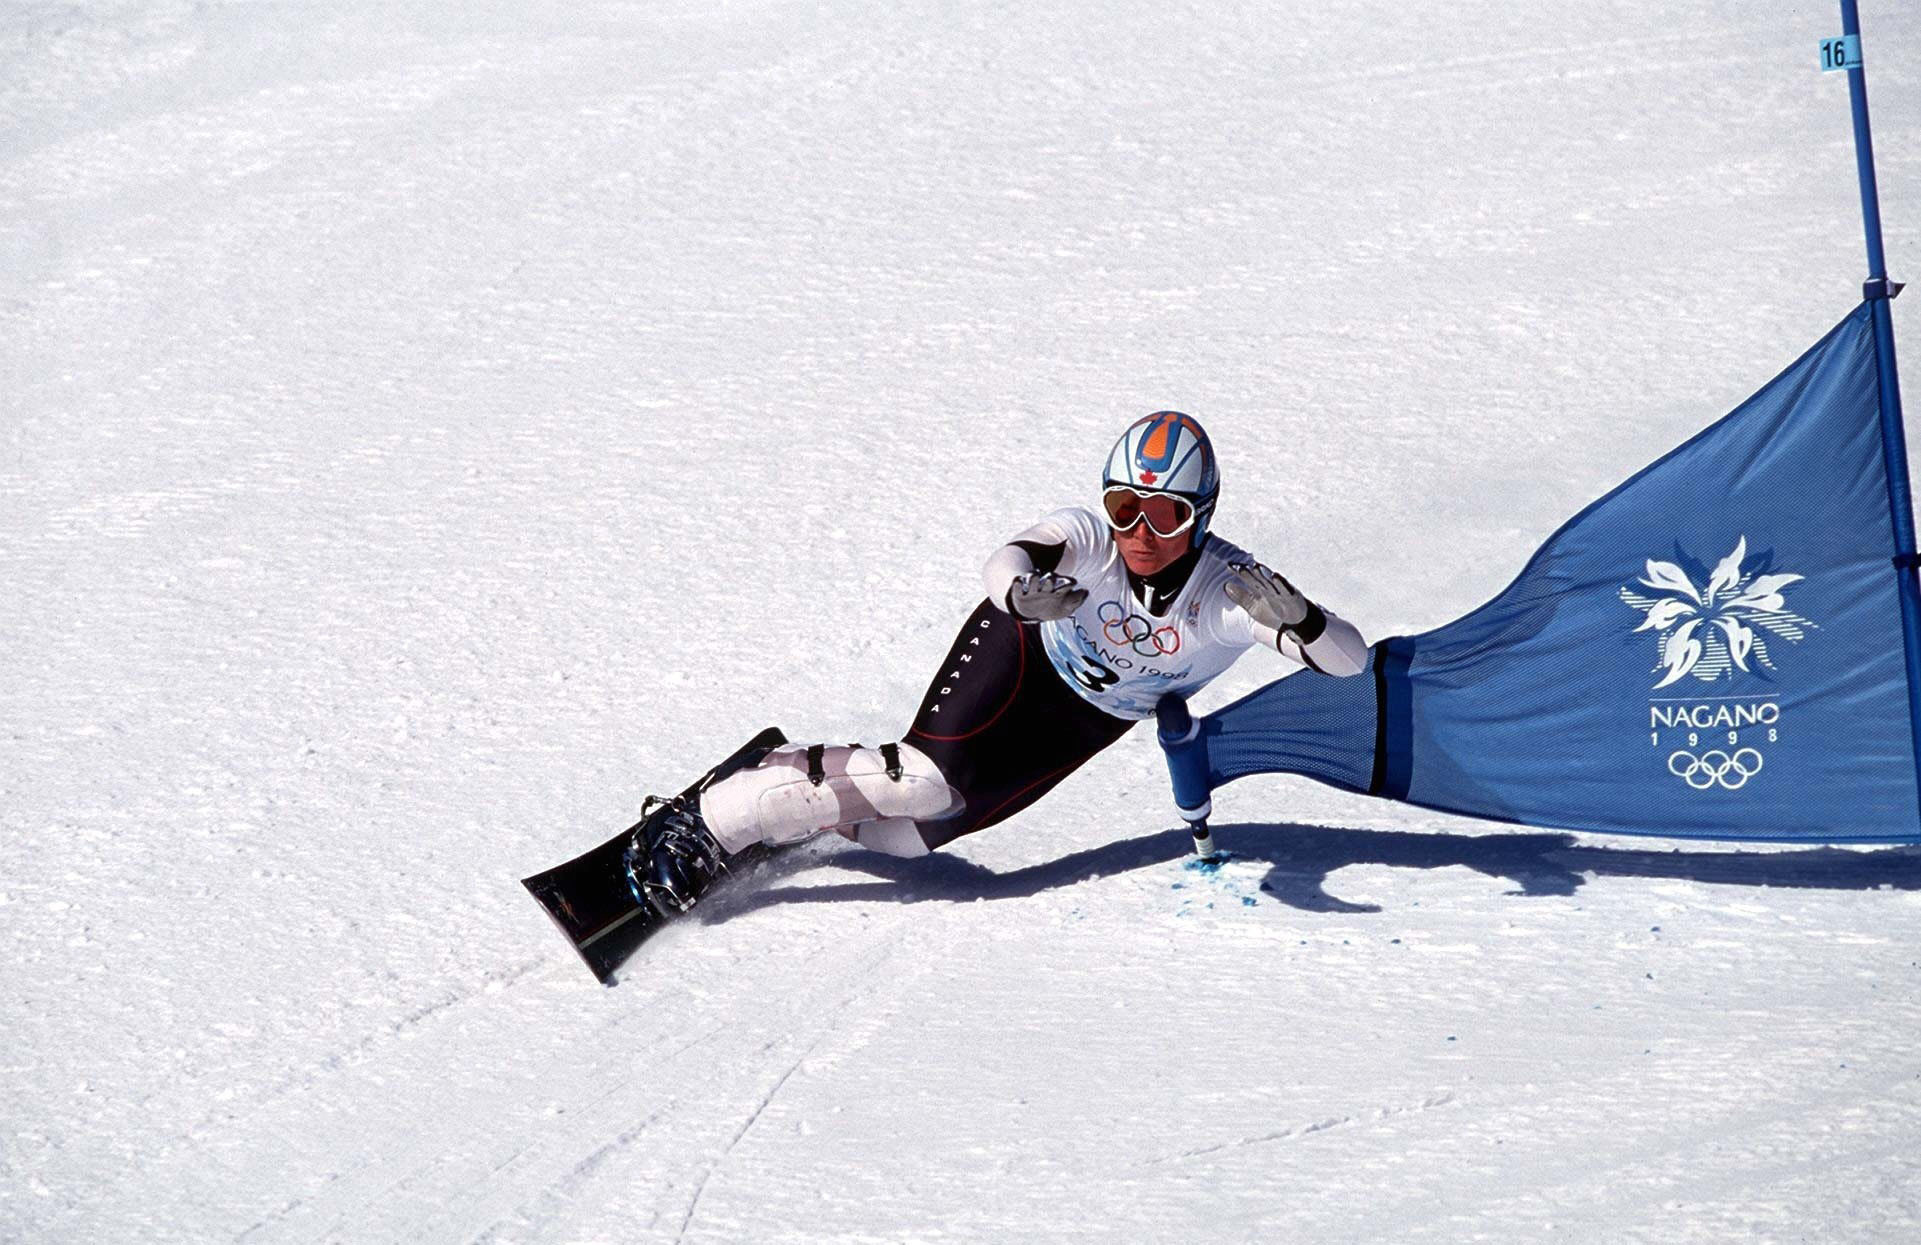 Snowboarding made its Winter Olympic debut at Nagano 1998 ©Getty Images